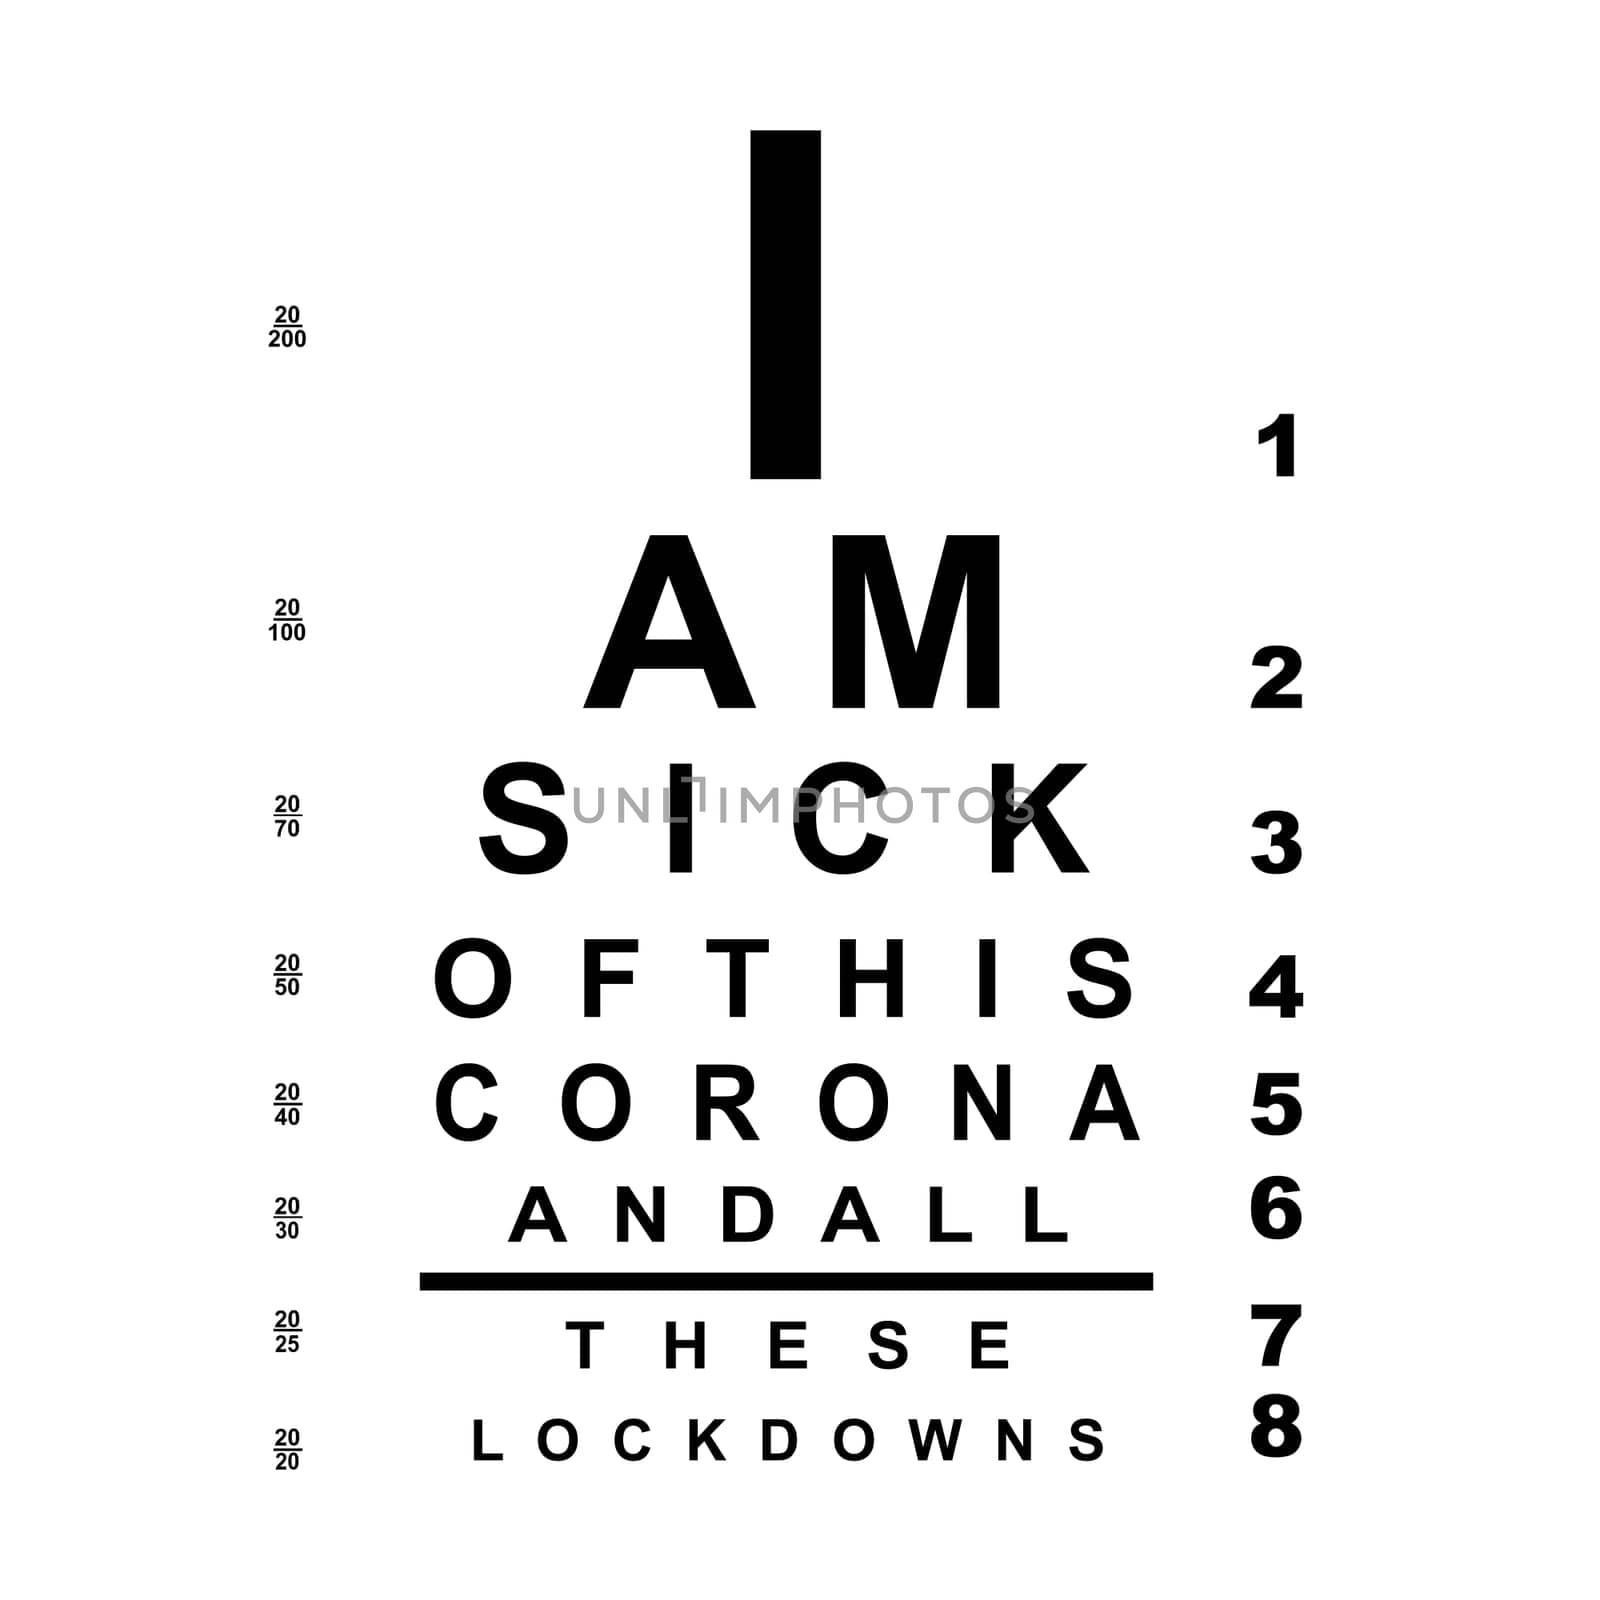 A eye chart with the text "I am sick of this corna and all these lockdowns'